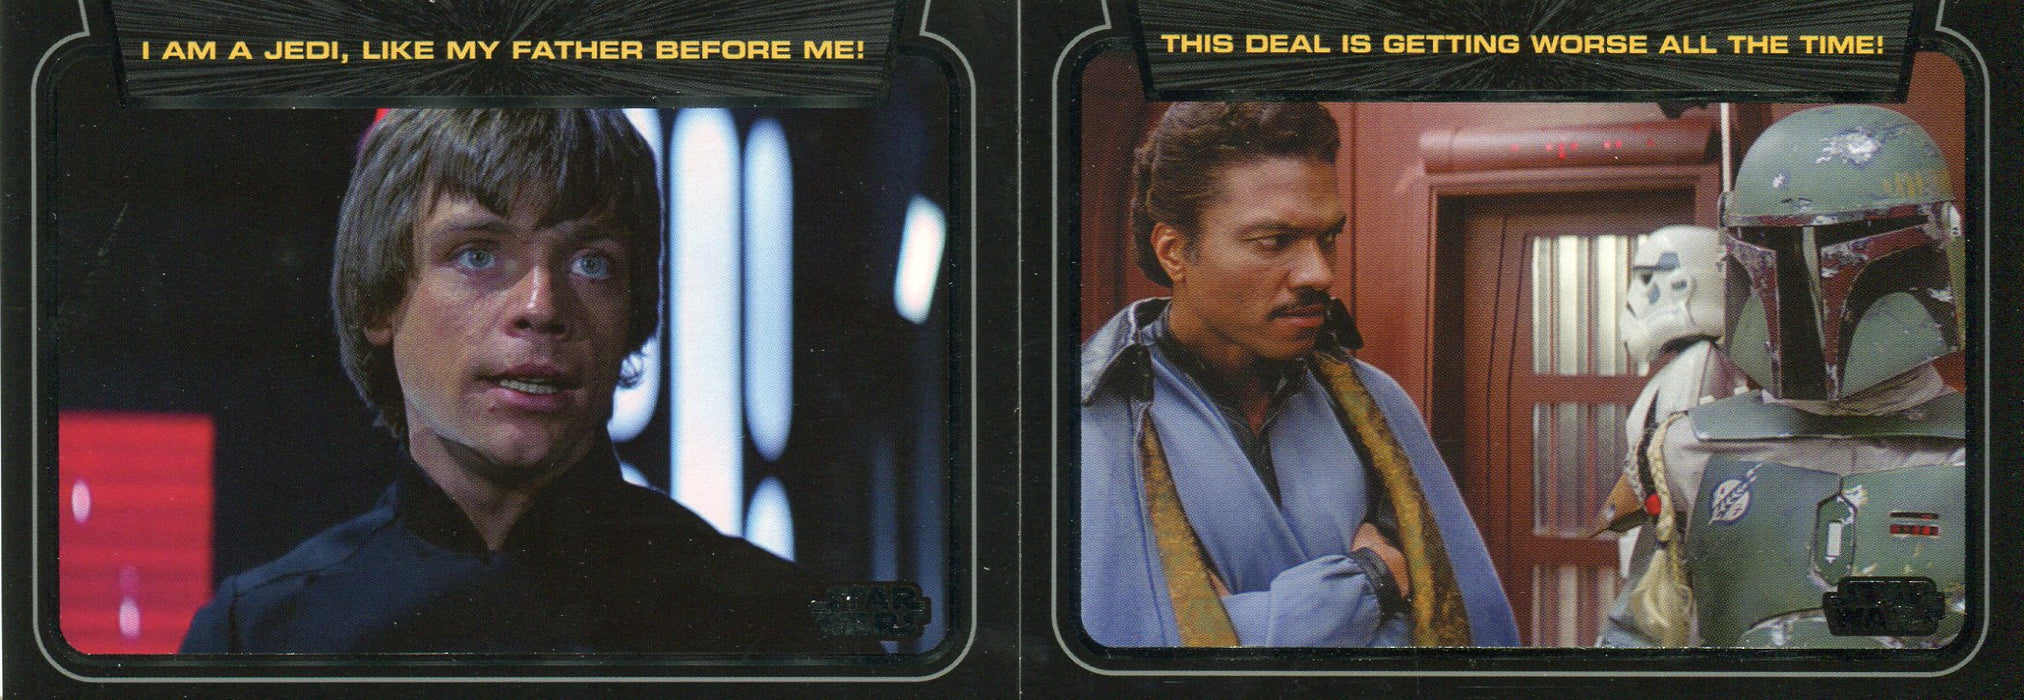 Star Wars Galactic Files Series 1 Classic Lines Chase Card Set CL1-10   - TvMovieCards.com